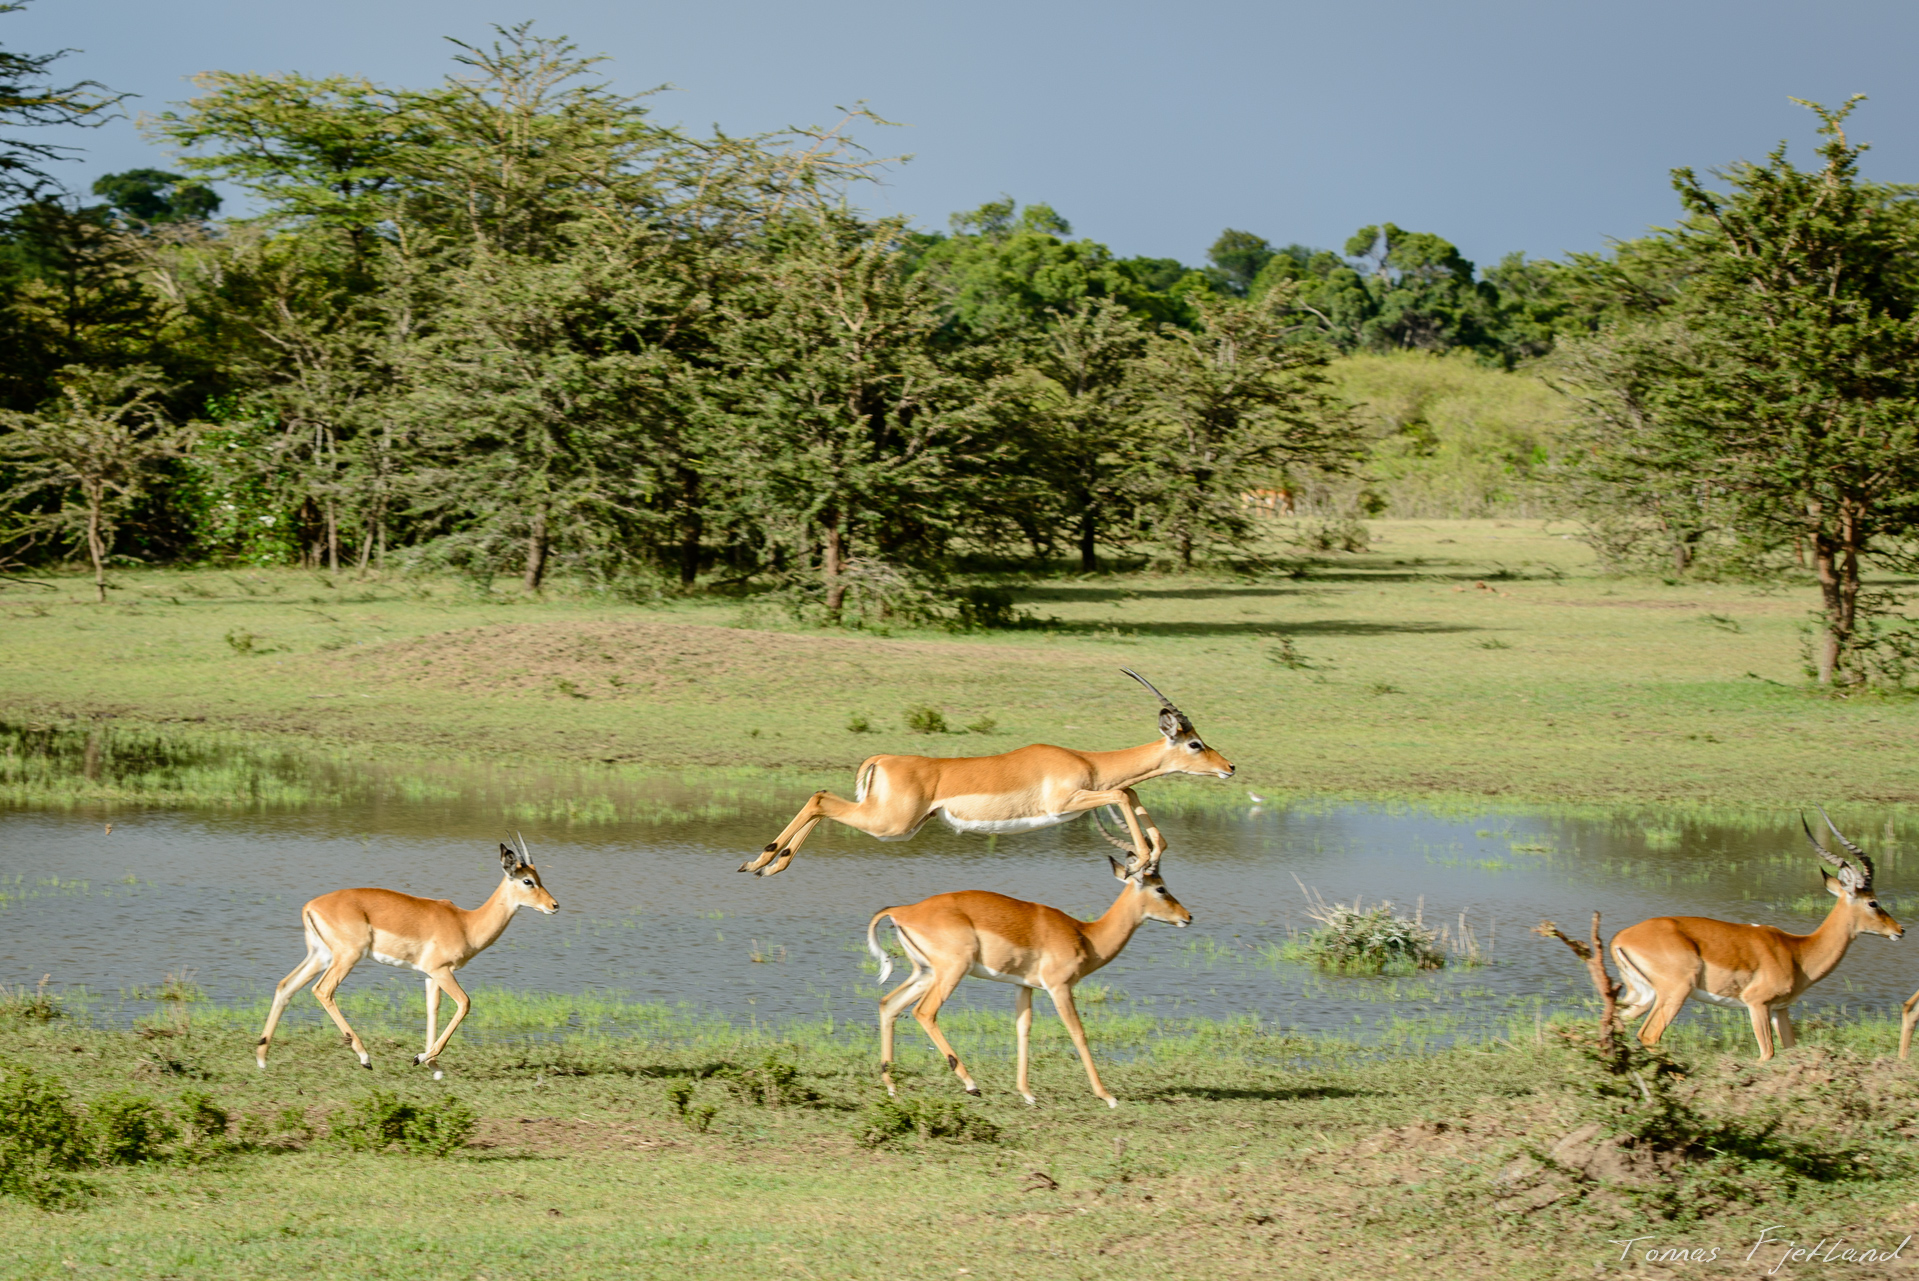 Impalas running next to the car, showing off their agility.